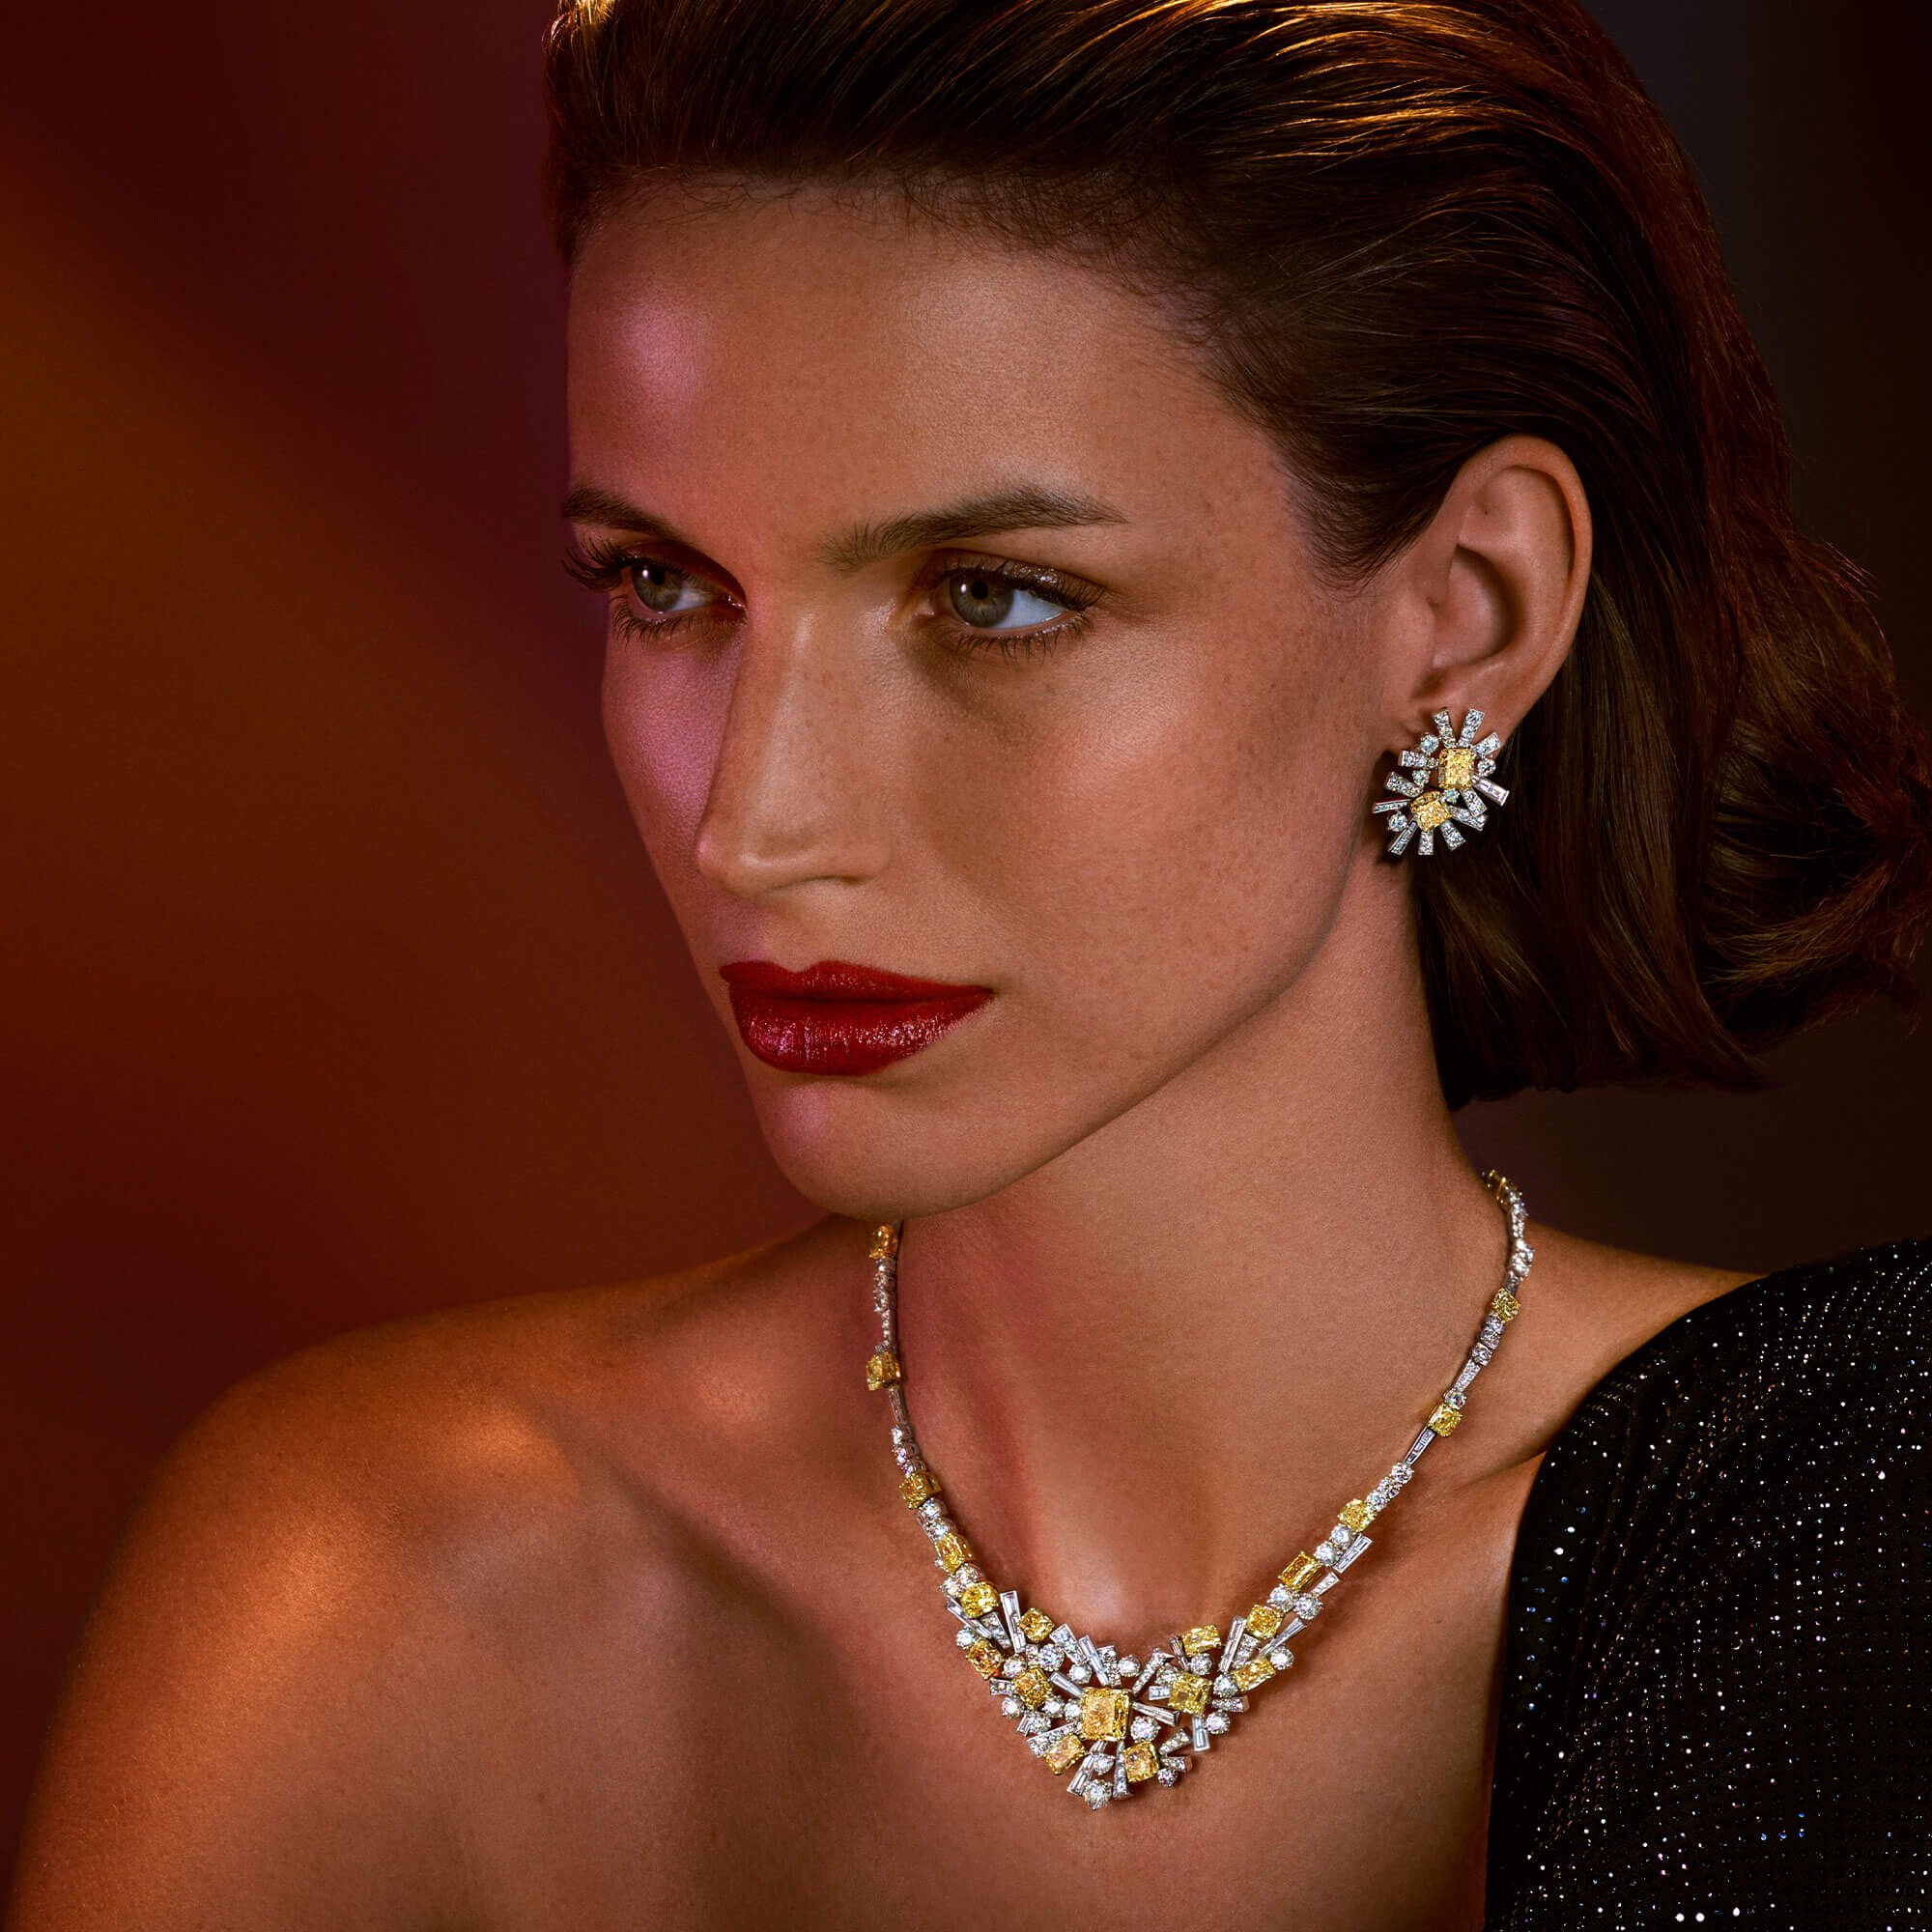 Graff high jewellery Fancy Yellow and white diamond Threads necklace and earrings worn by model